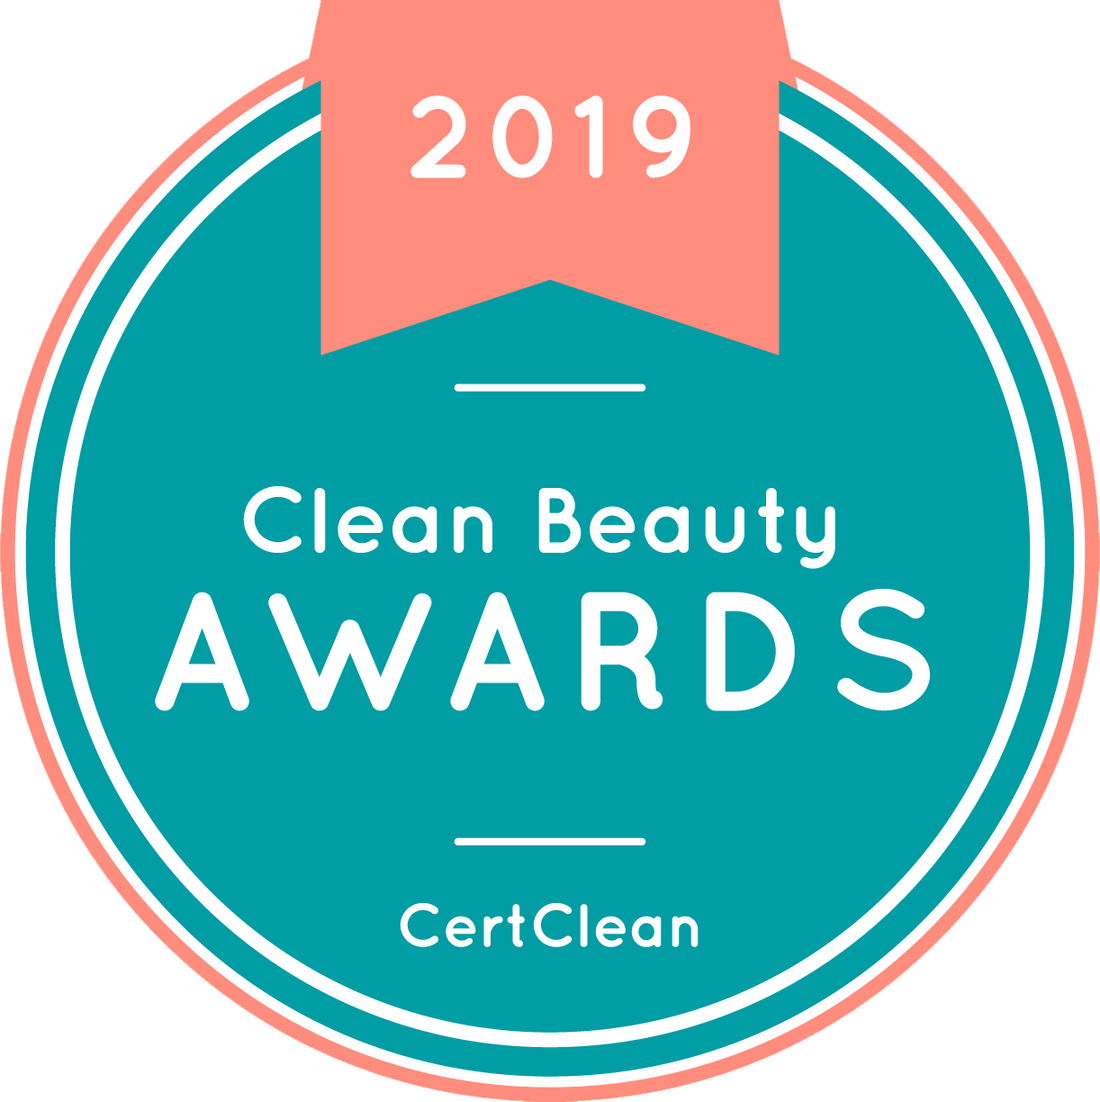 This Week I’ve Been Judging the "Clean Beauty Awards"